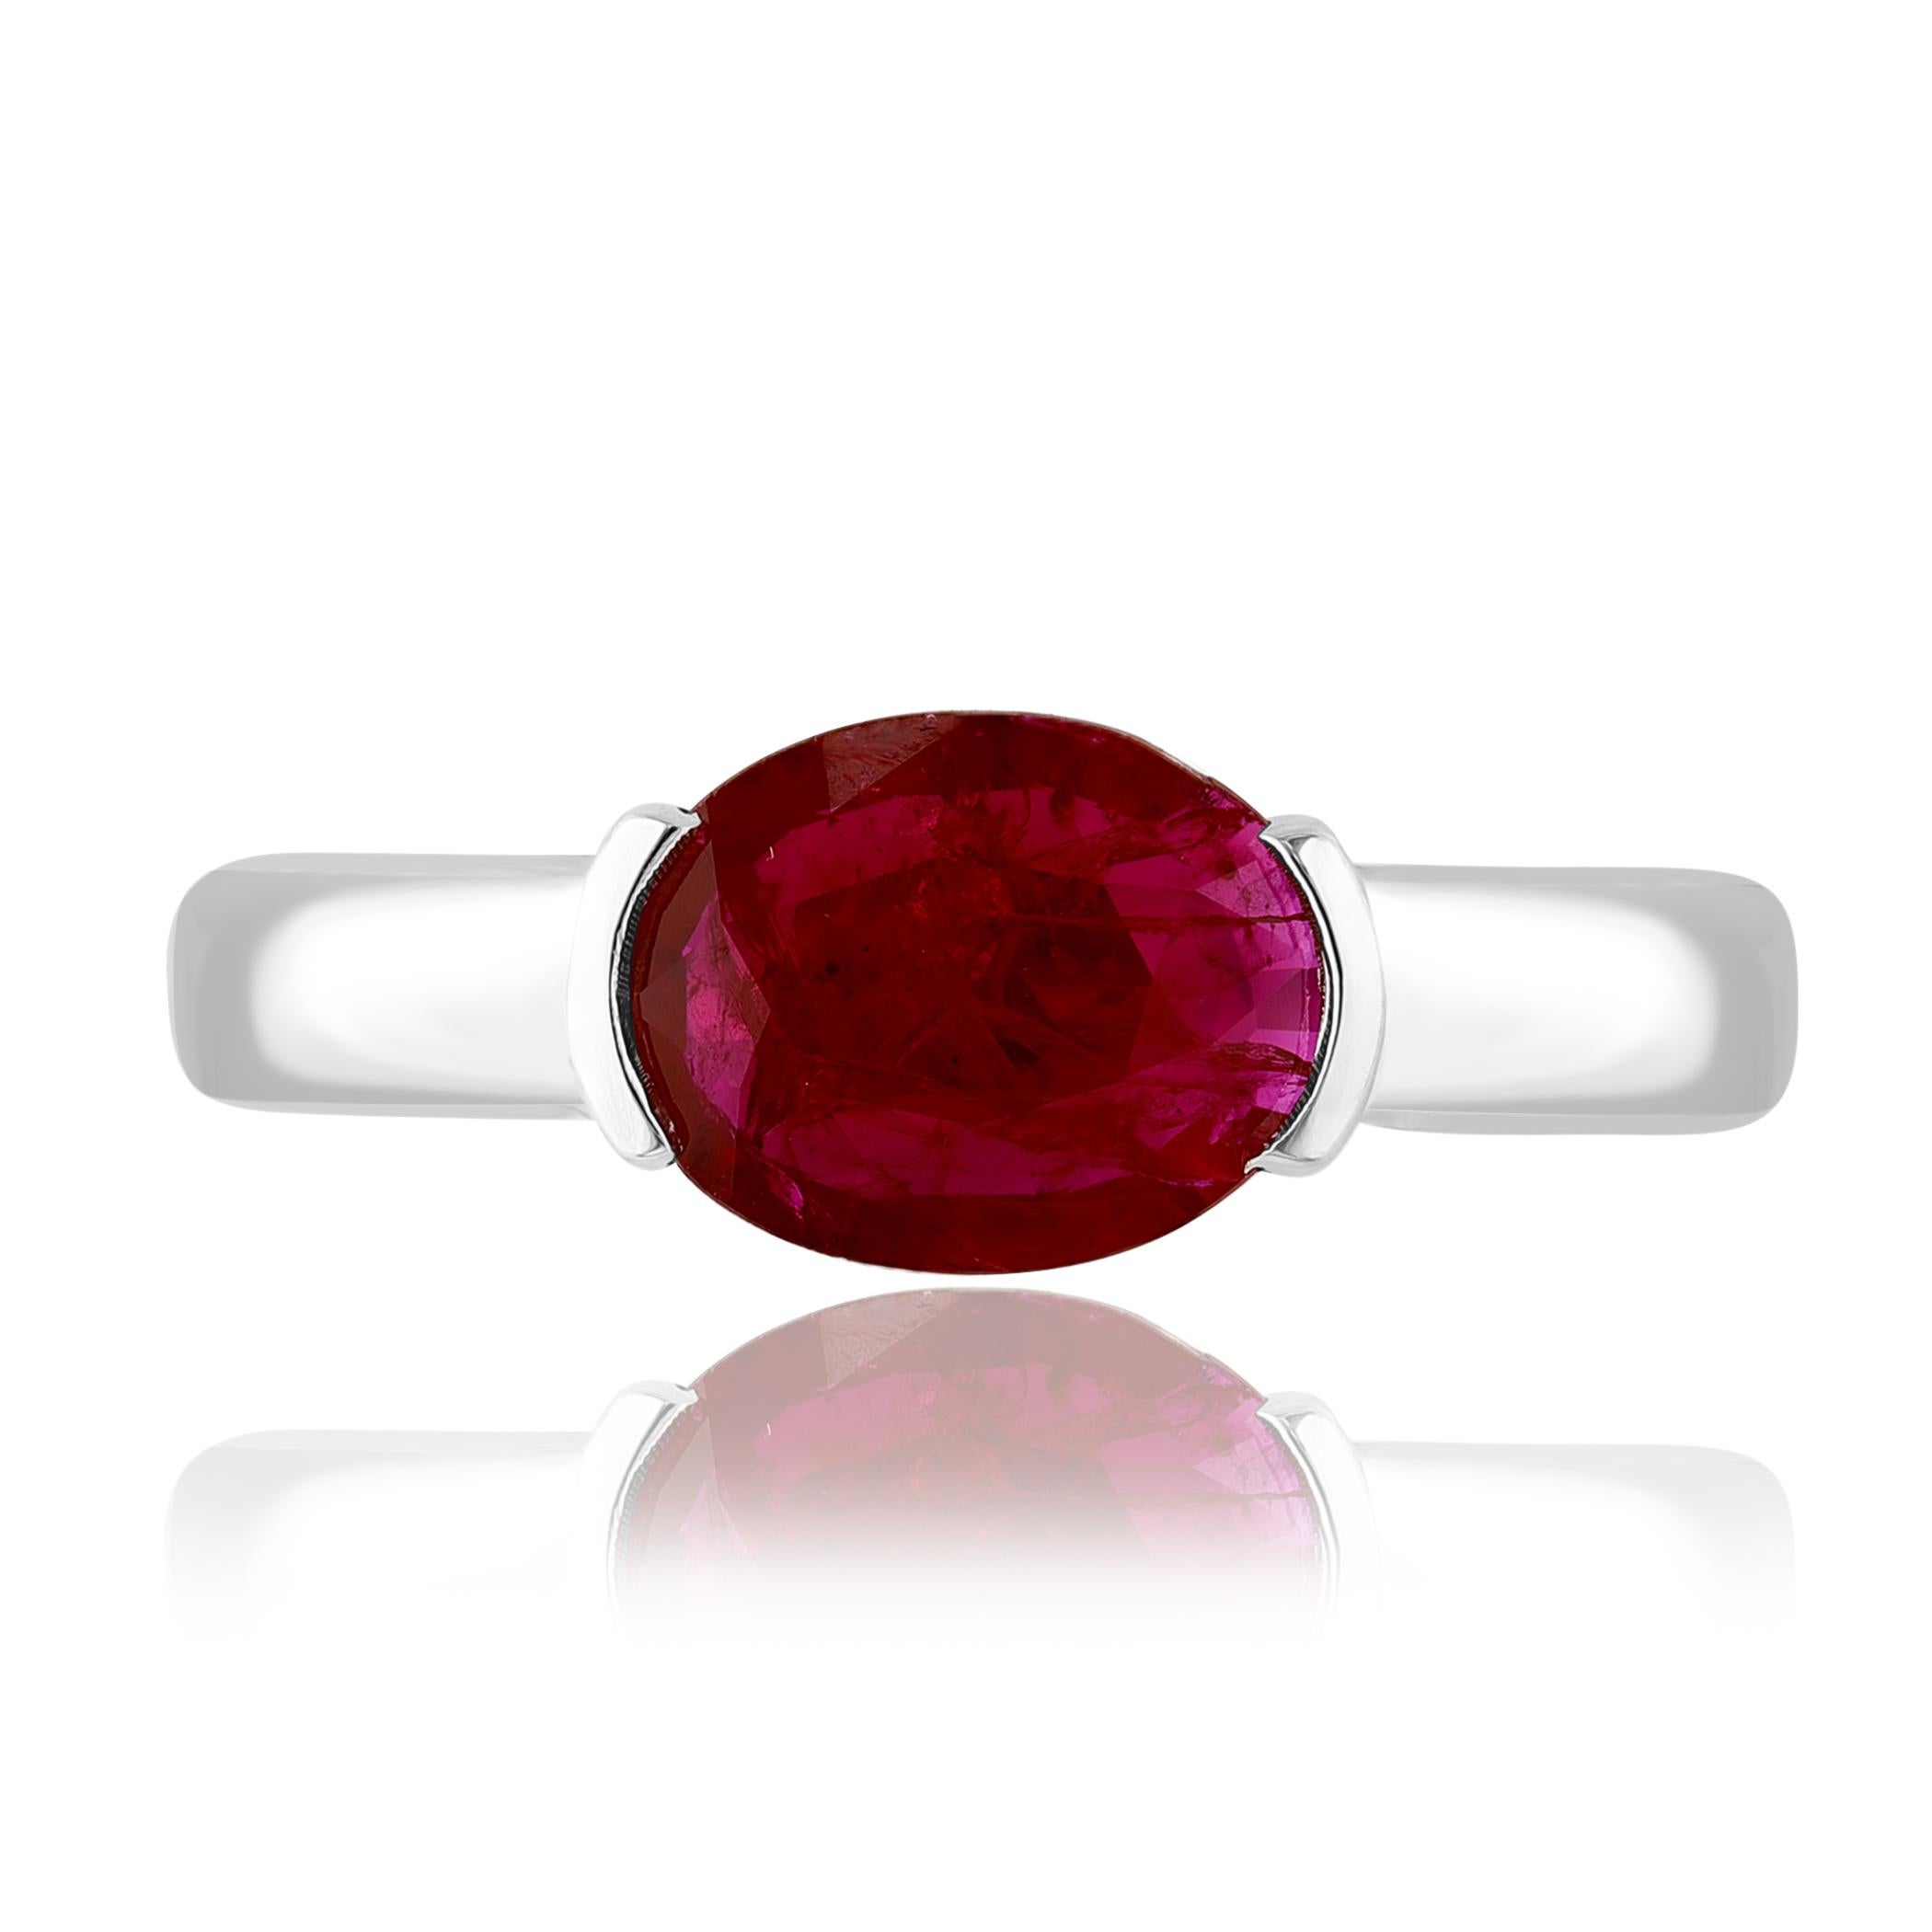 An elegant wedding band ring featuring an astonishing 1.37-carat oval cut ruby, set in a beautiful wide 14K white gold band. 

Style is available in different price ranges. Prices are based on your selection. Don't hesitate to get in touch with us